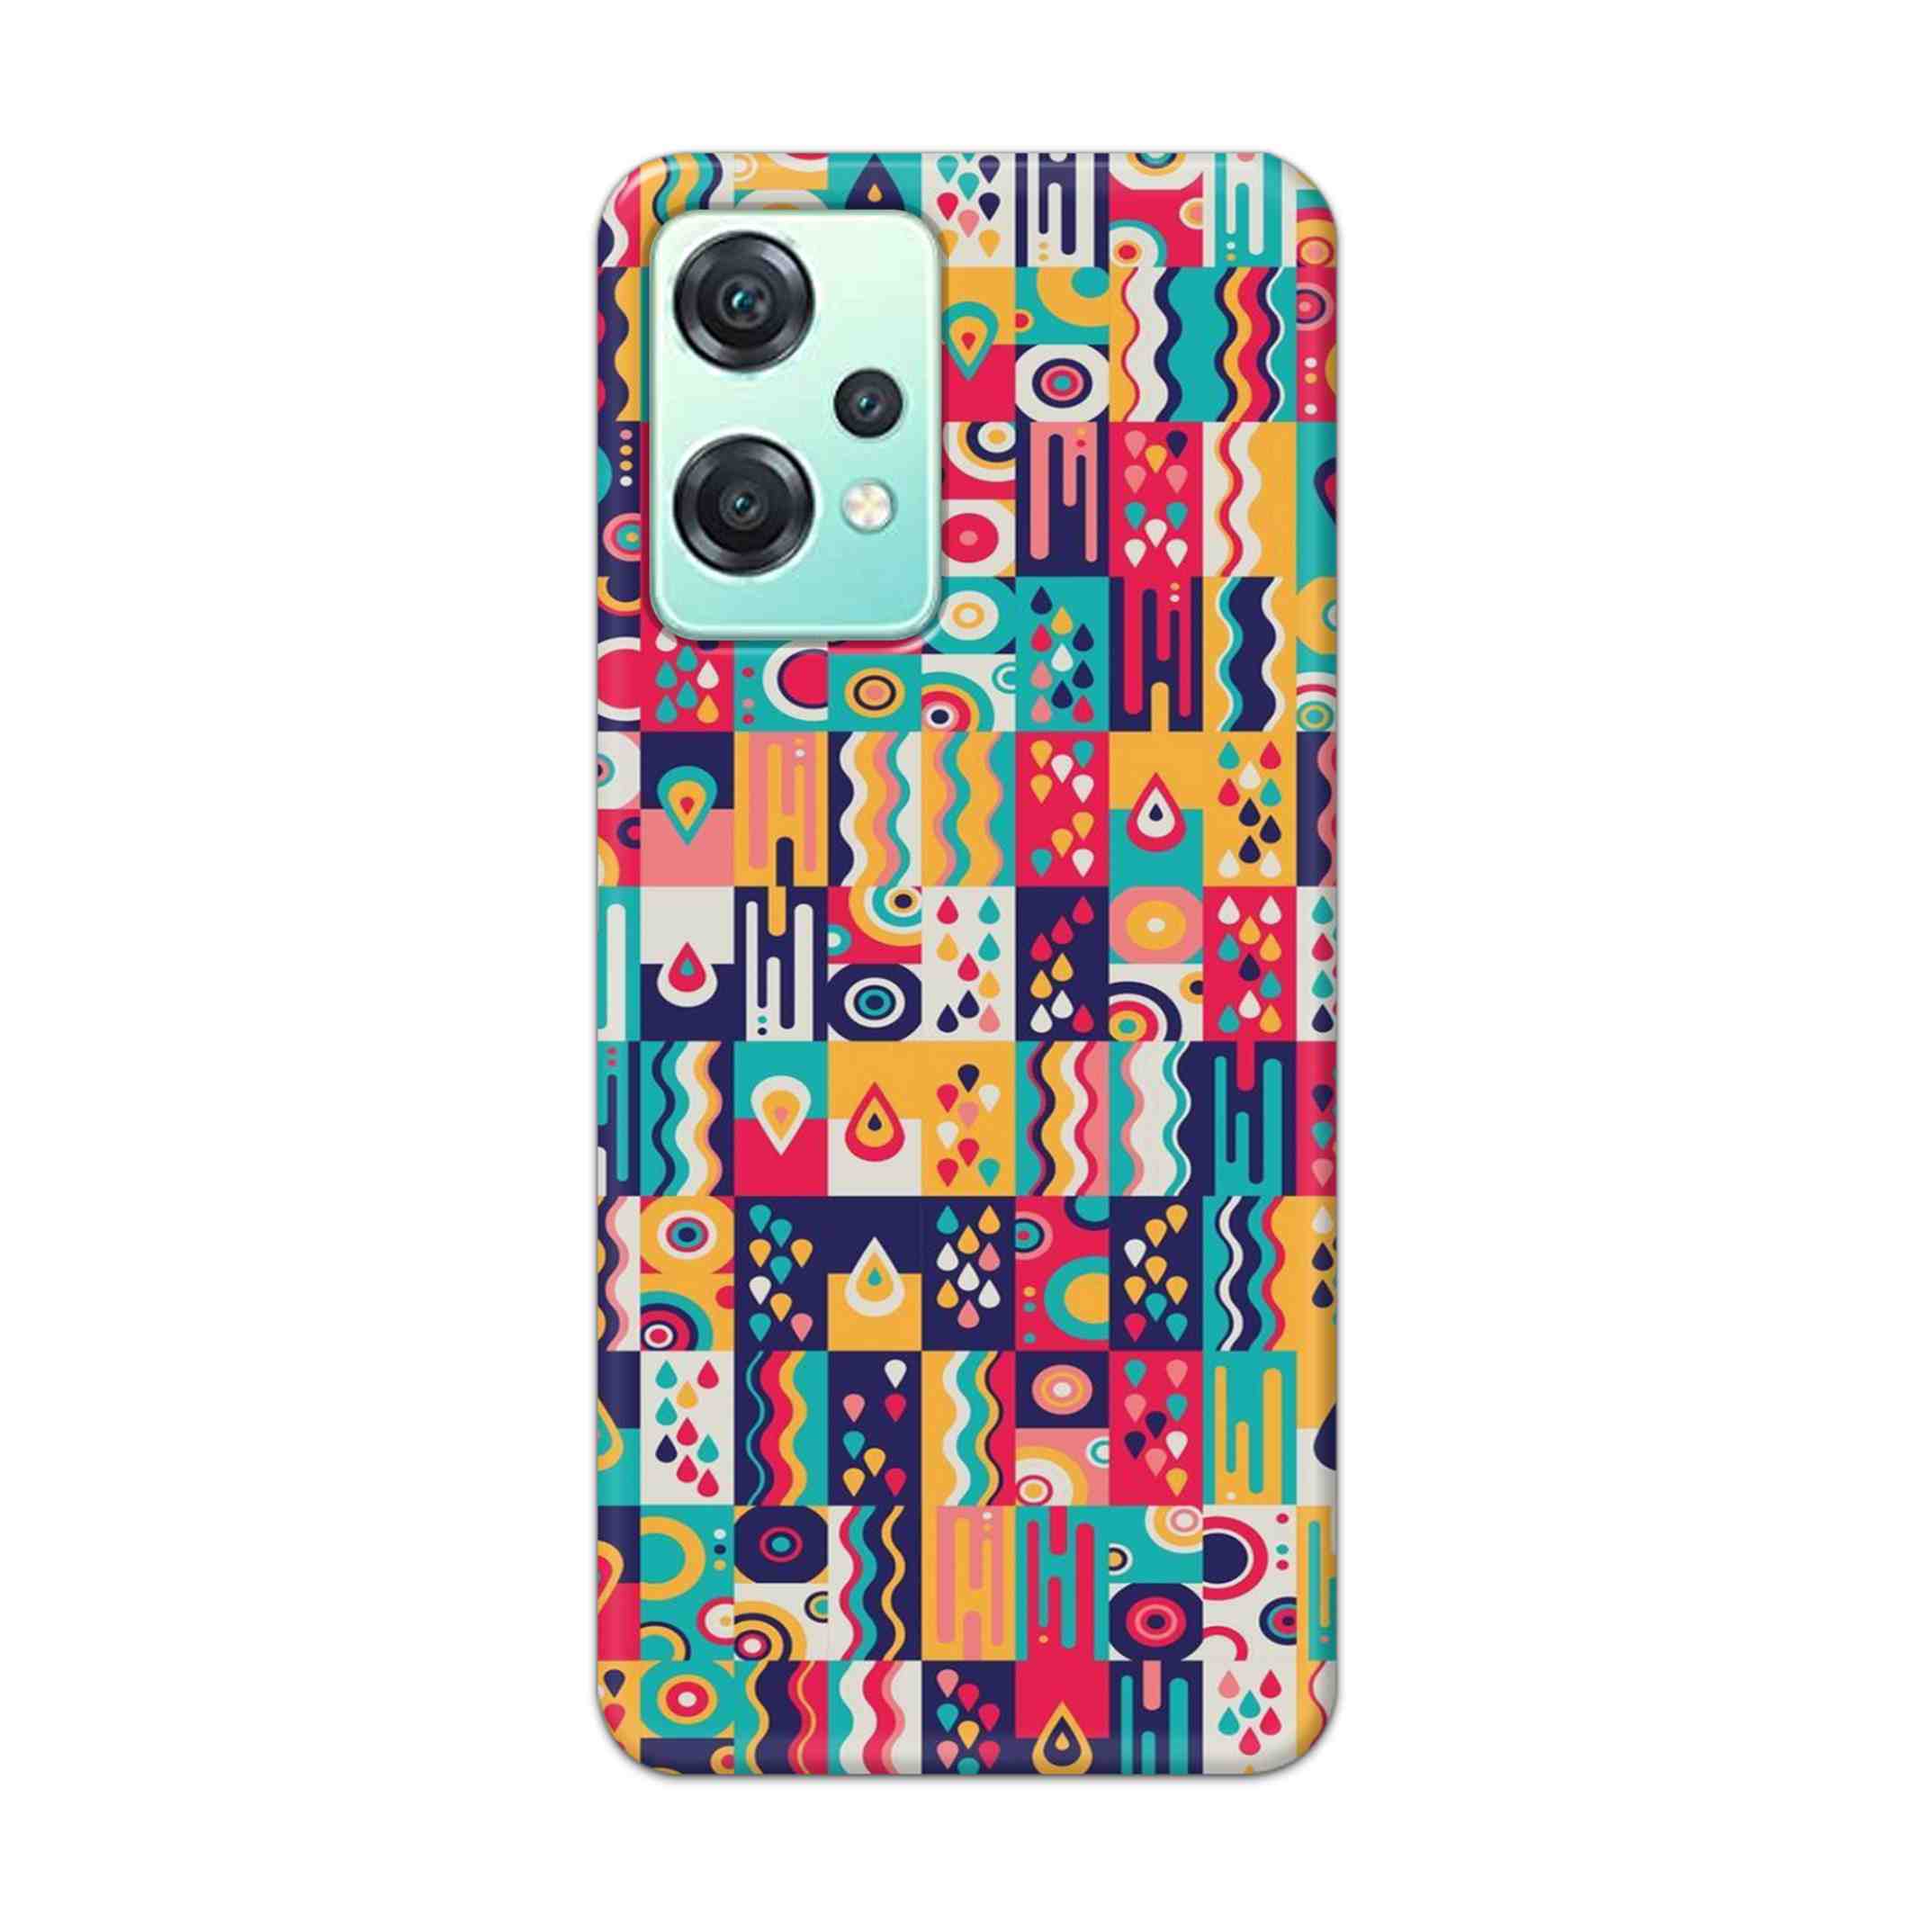 Buy Art Hard Back Mobile Phone Case Cover For OnePlus Nord CE 2 Lite 5G Online